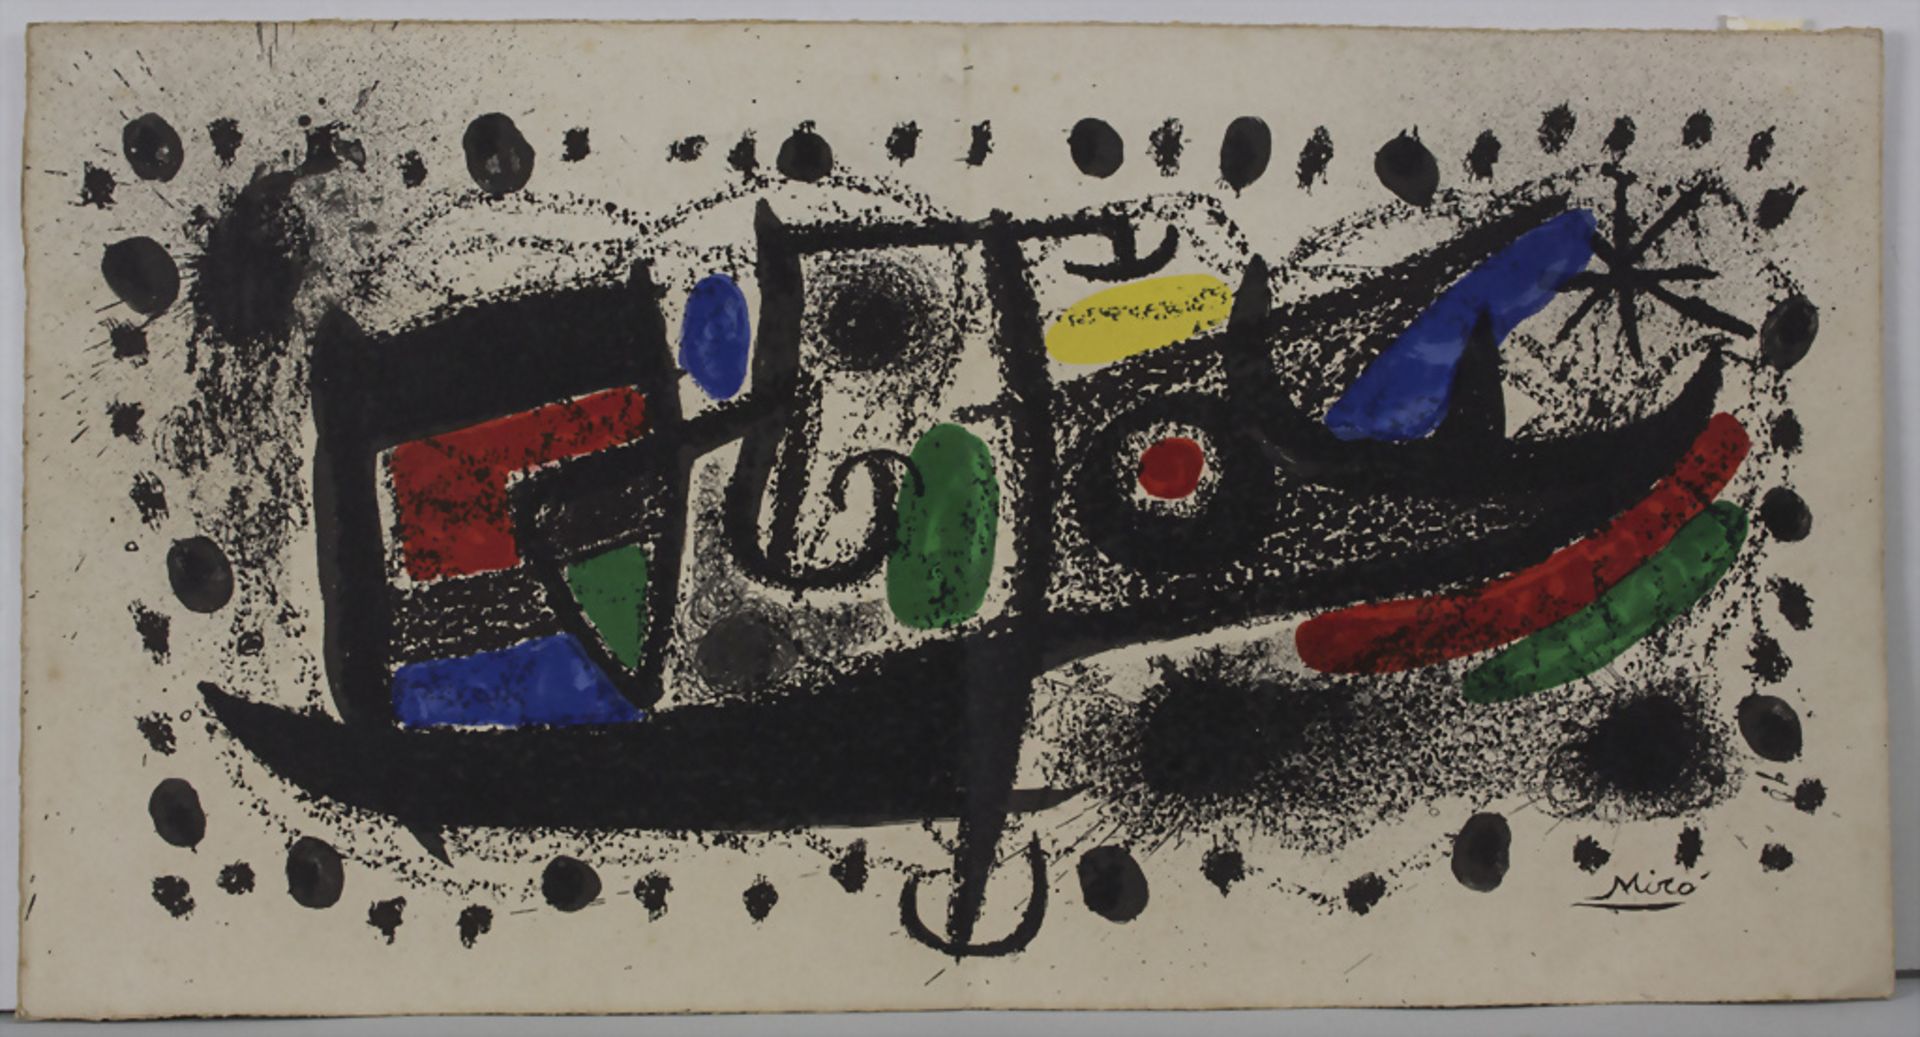 Joan Miró (1893-1983), 'Abstrakte Komposition / 'An abstract composition', 2. Hälfte 20. Jh.